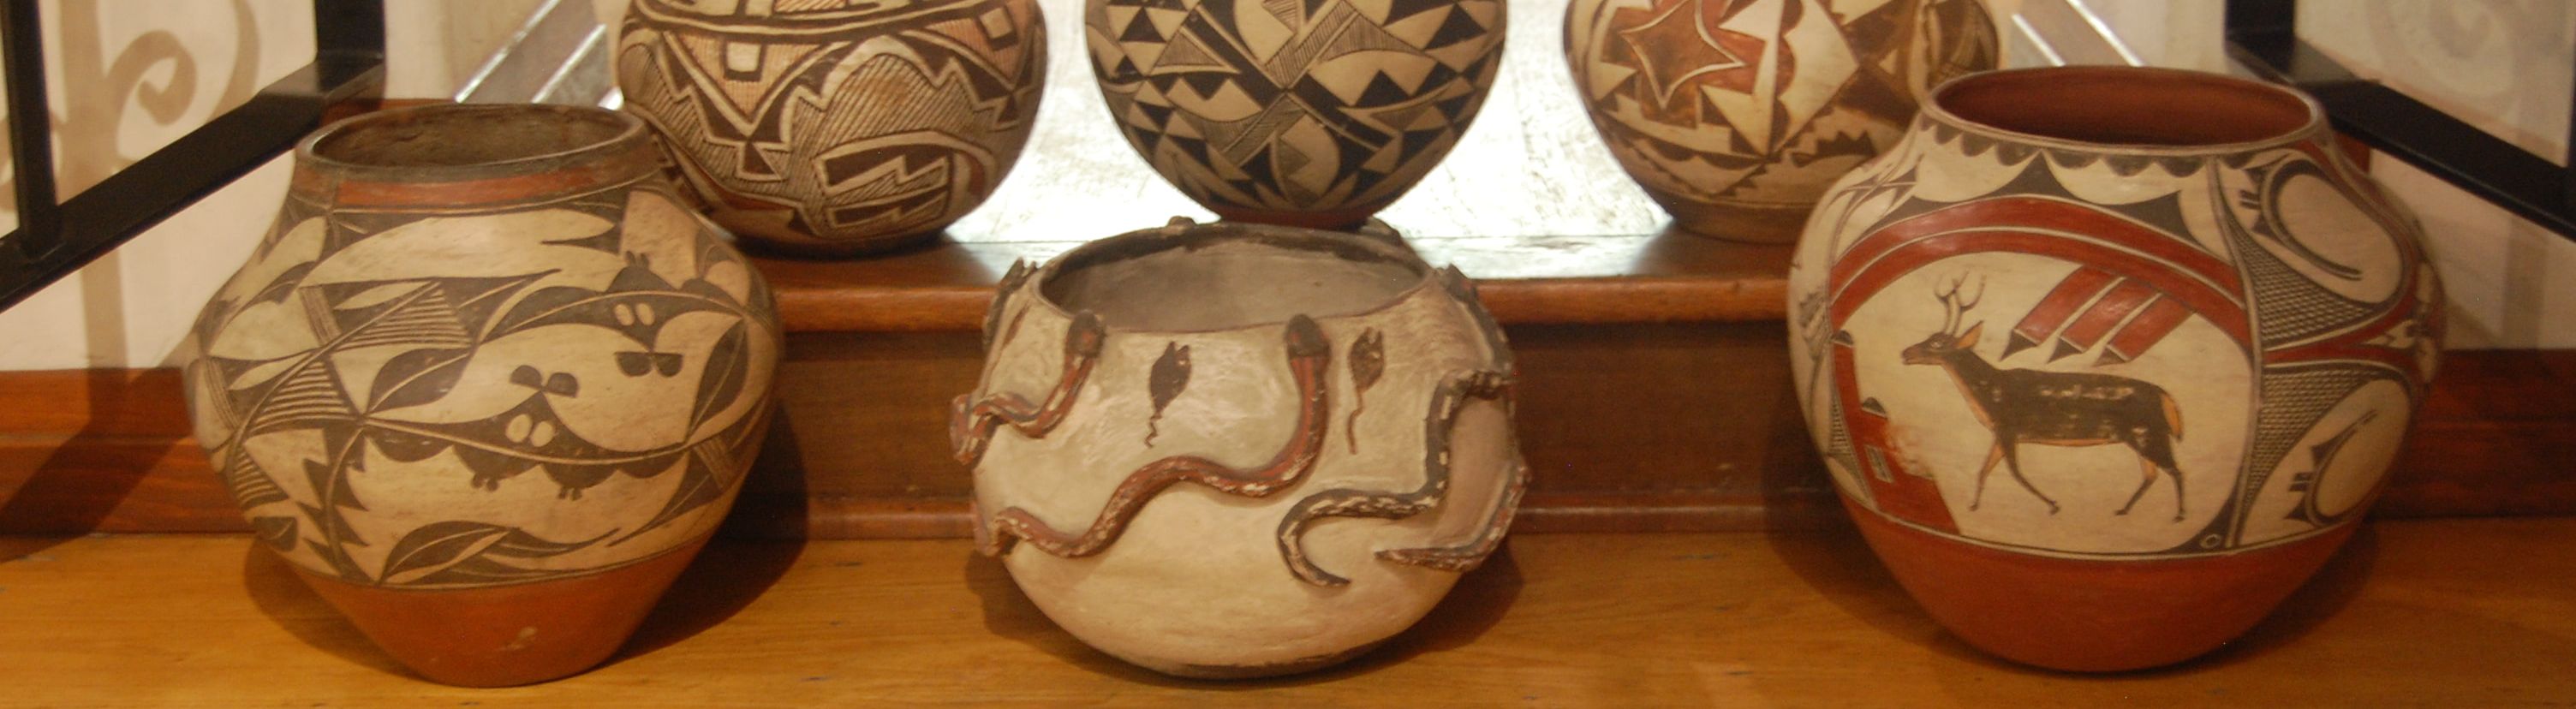 Shop for Native American Pottery - Morning Star Traders - Morning